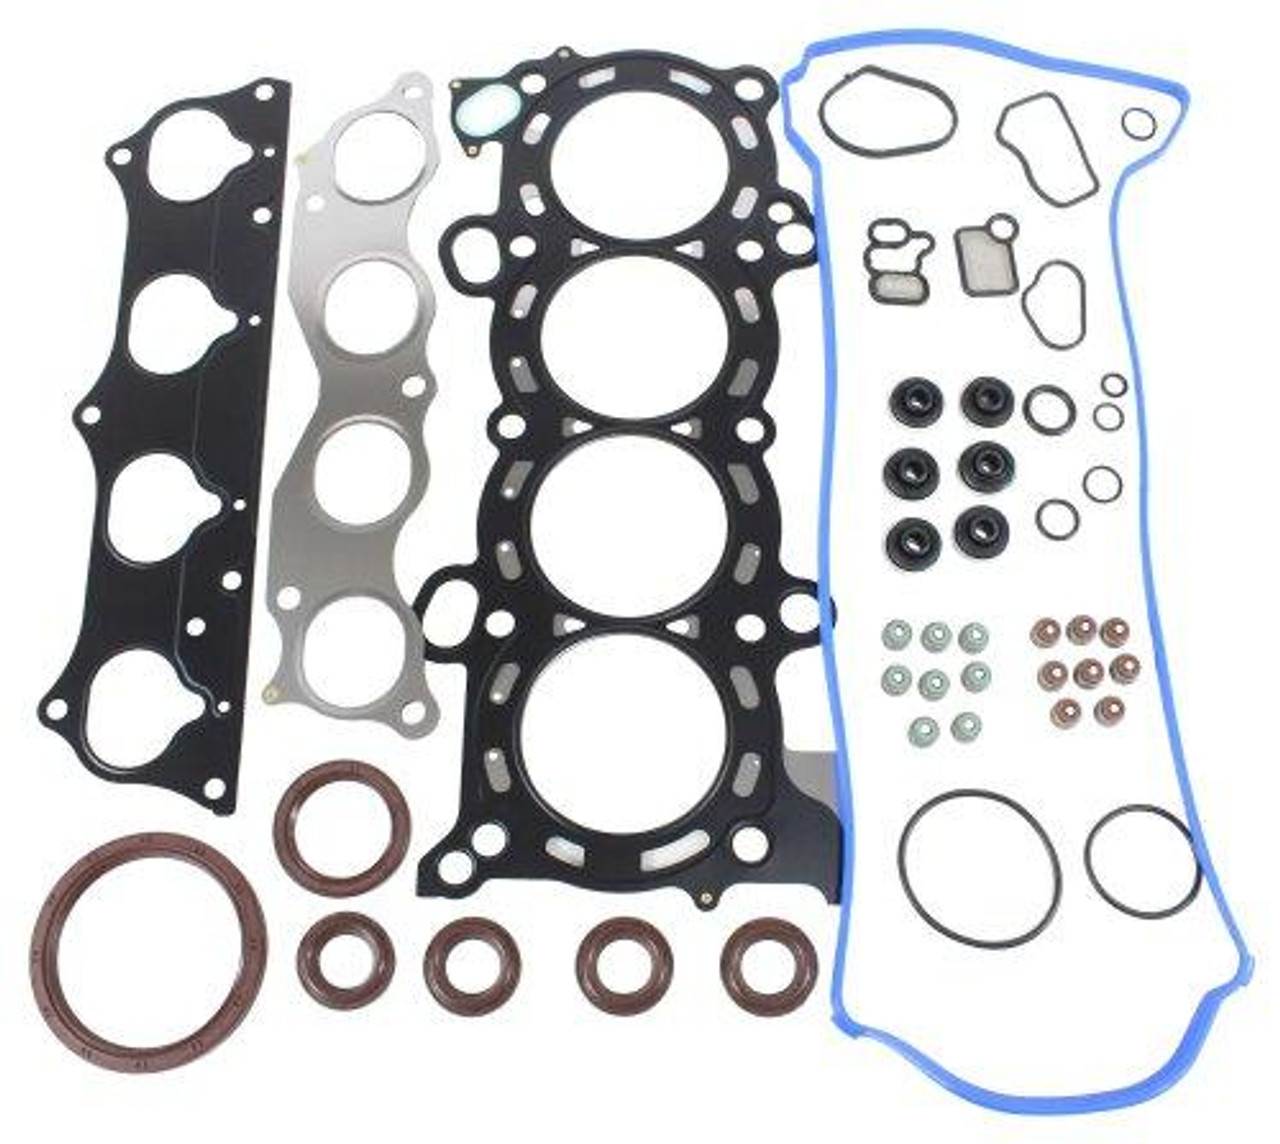 Full Gasket Set - 2004 Acura RSX 2.0L Engine Parts # FGS2018ZE3